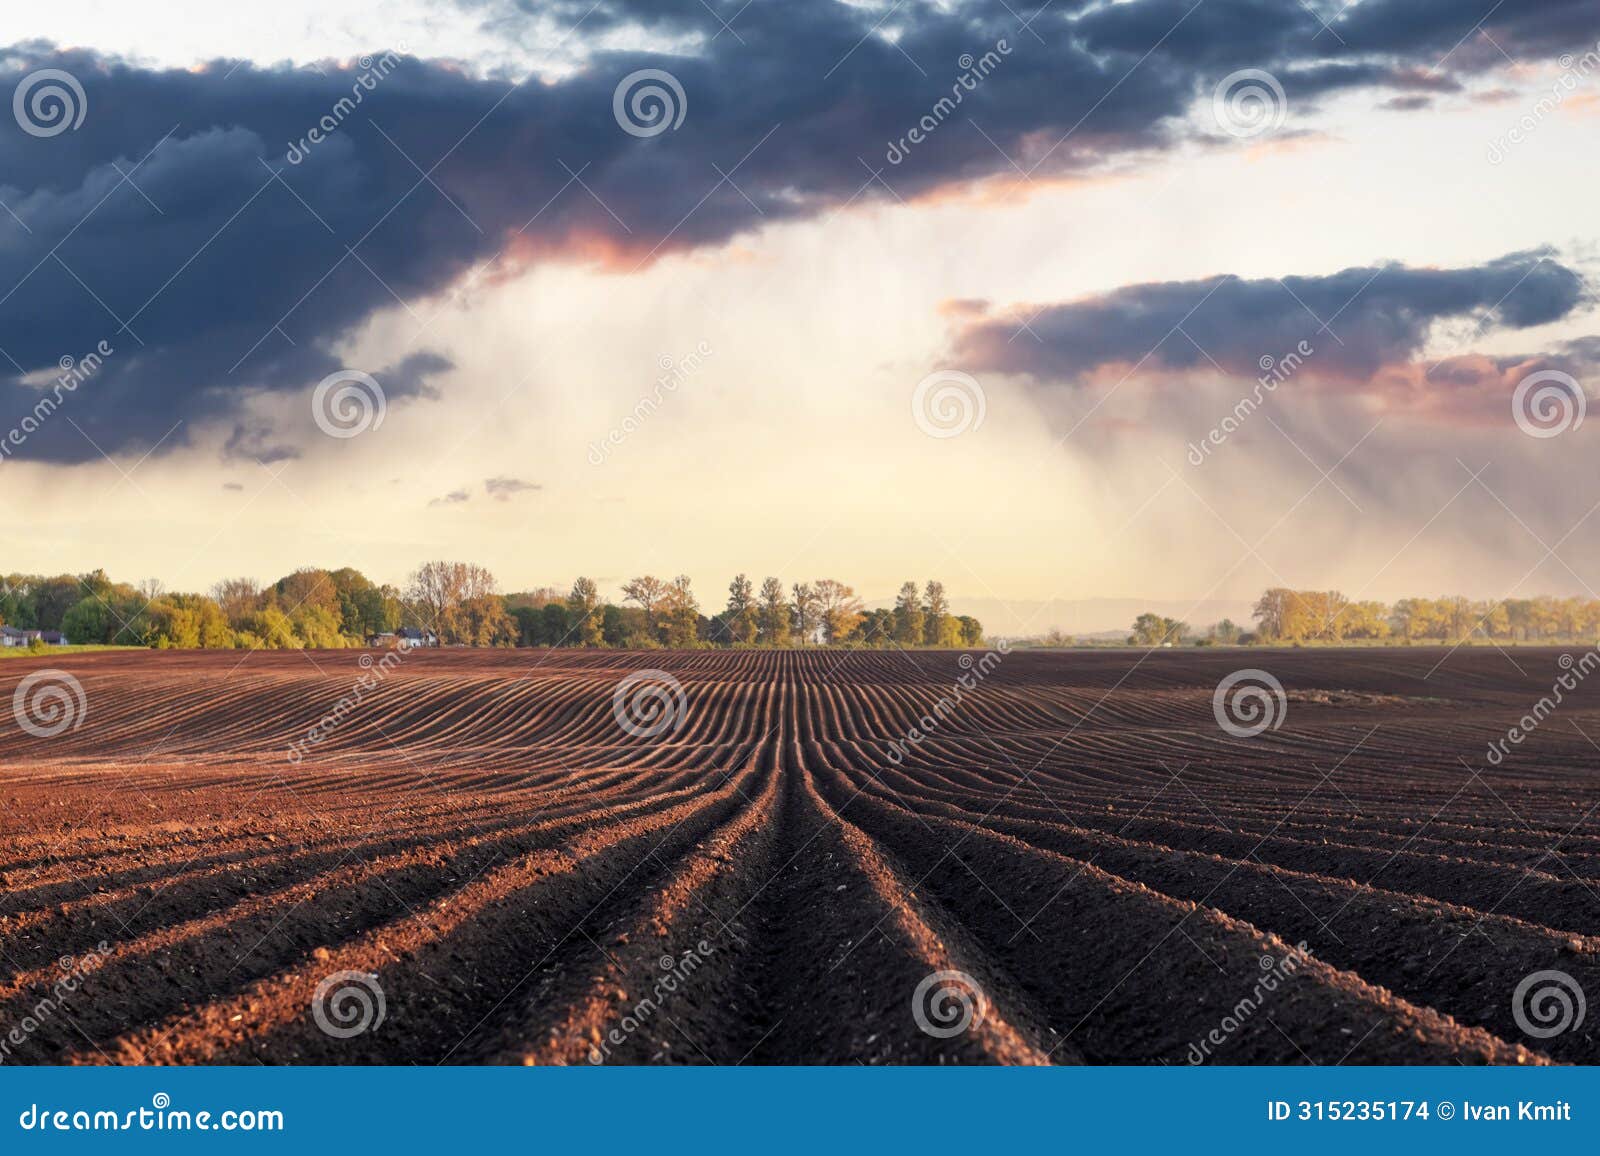 agricultural field with even rows and watering rainy clouds